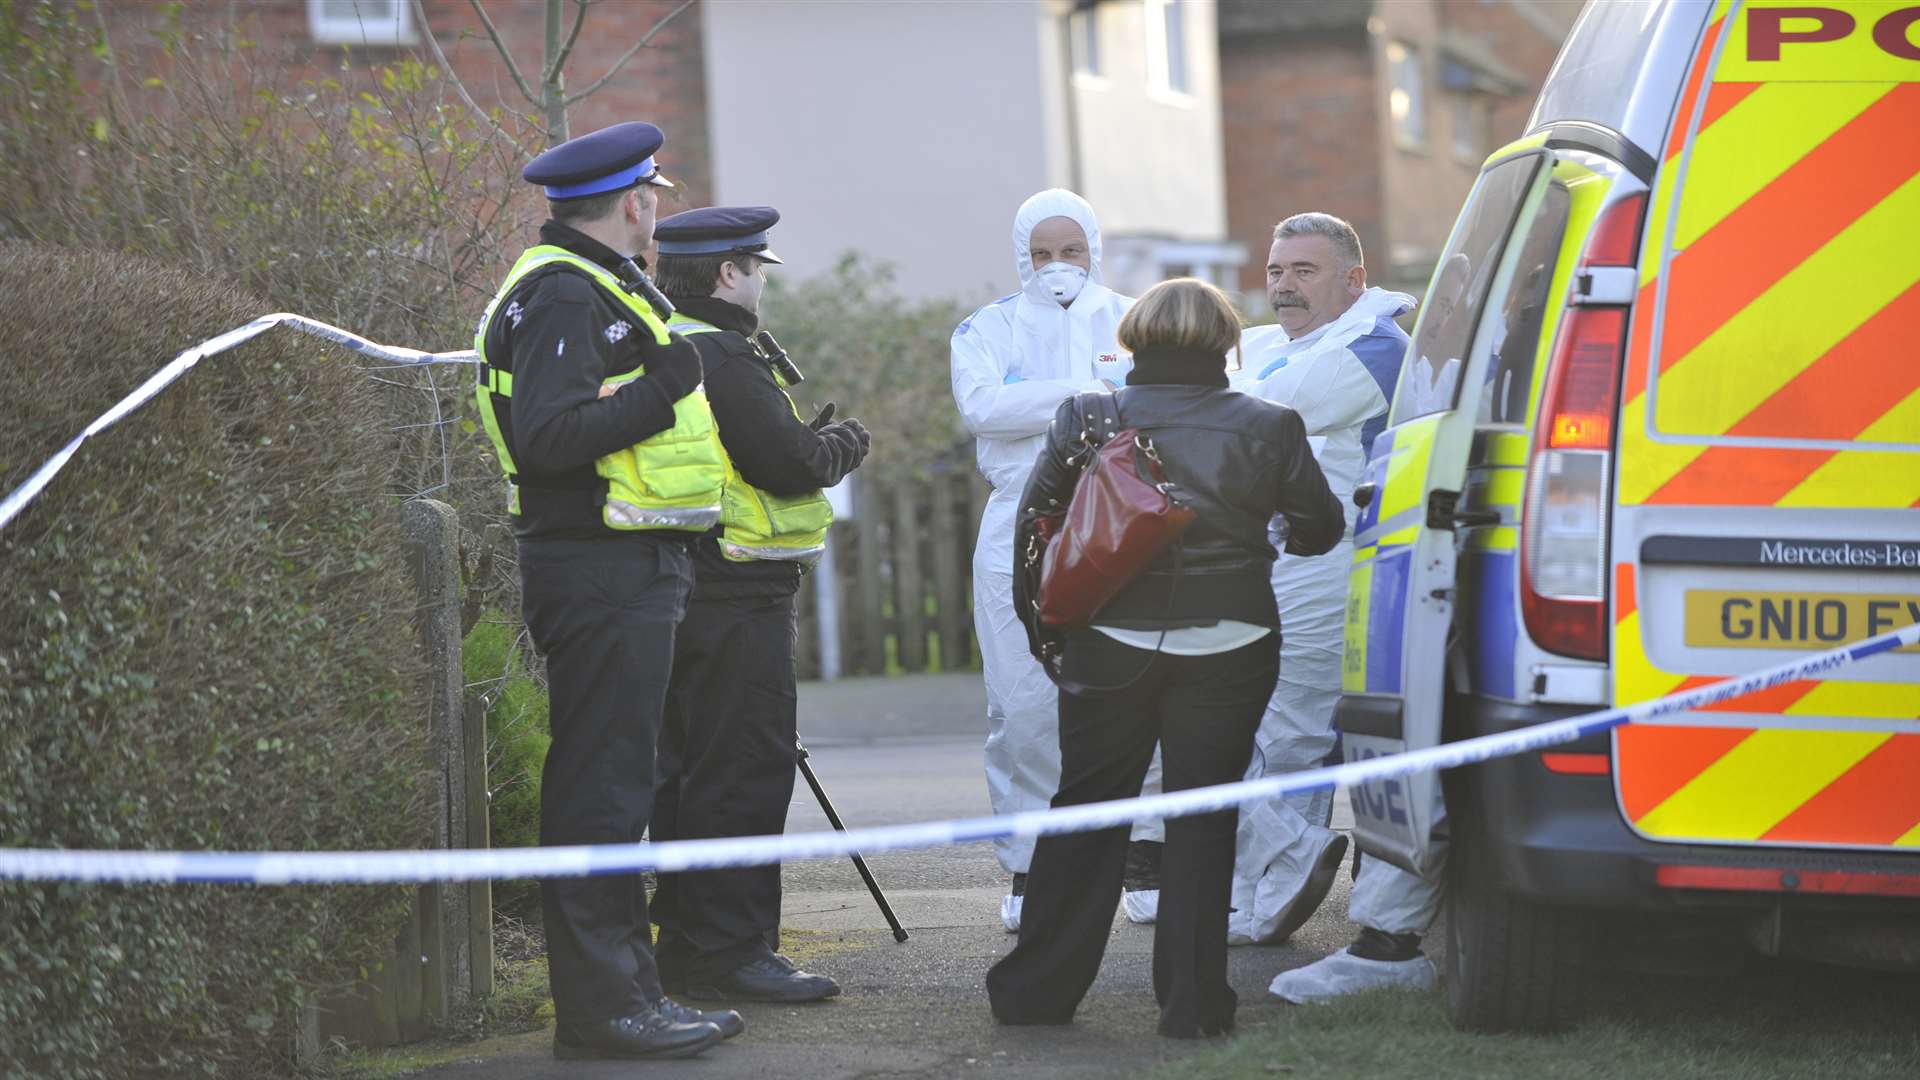 A police forensic team at the scene. Picture: Tony Flashman